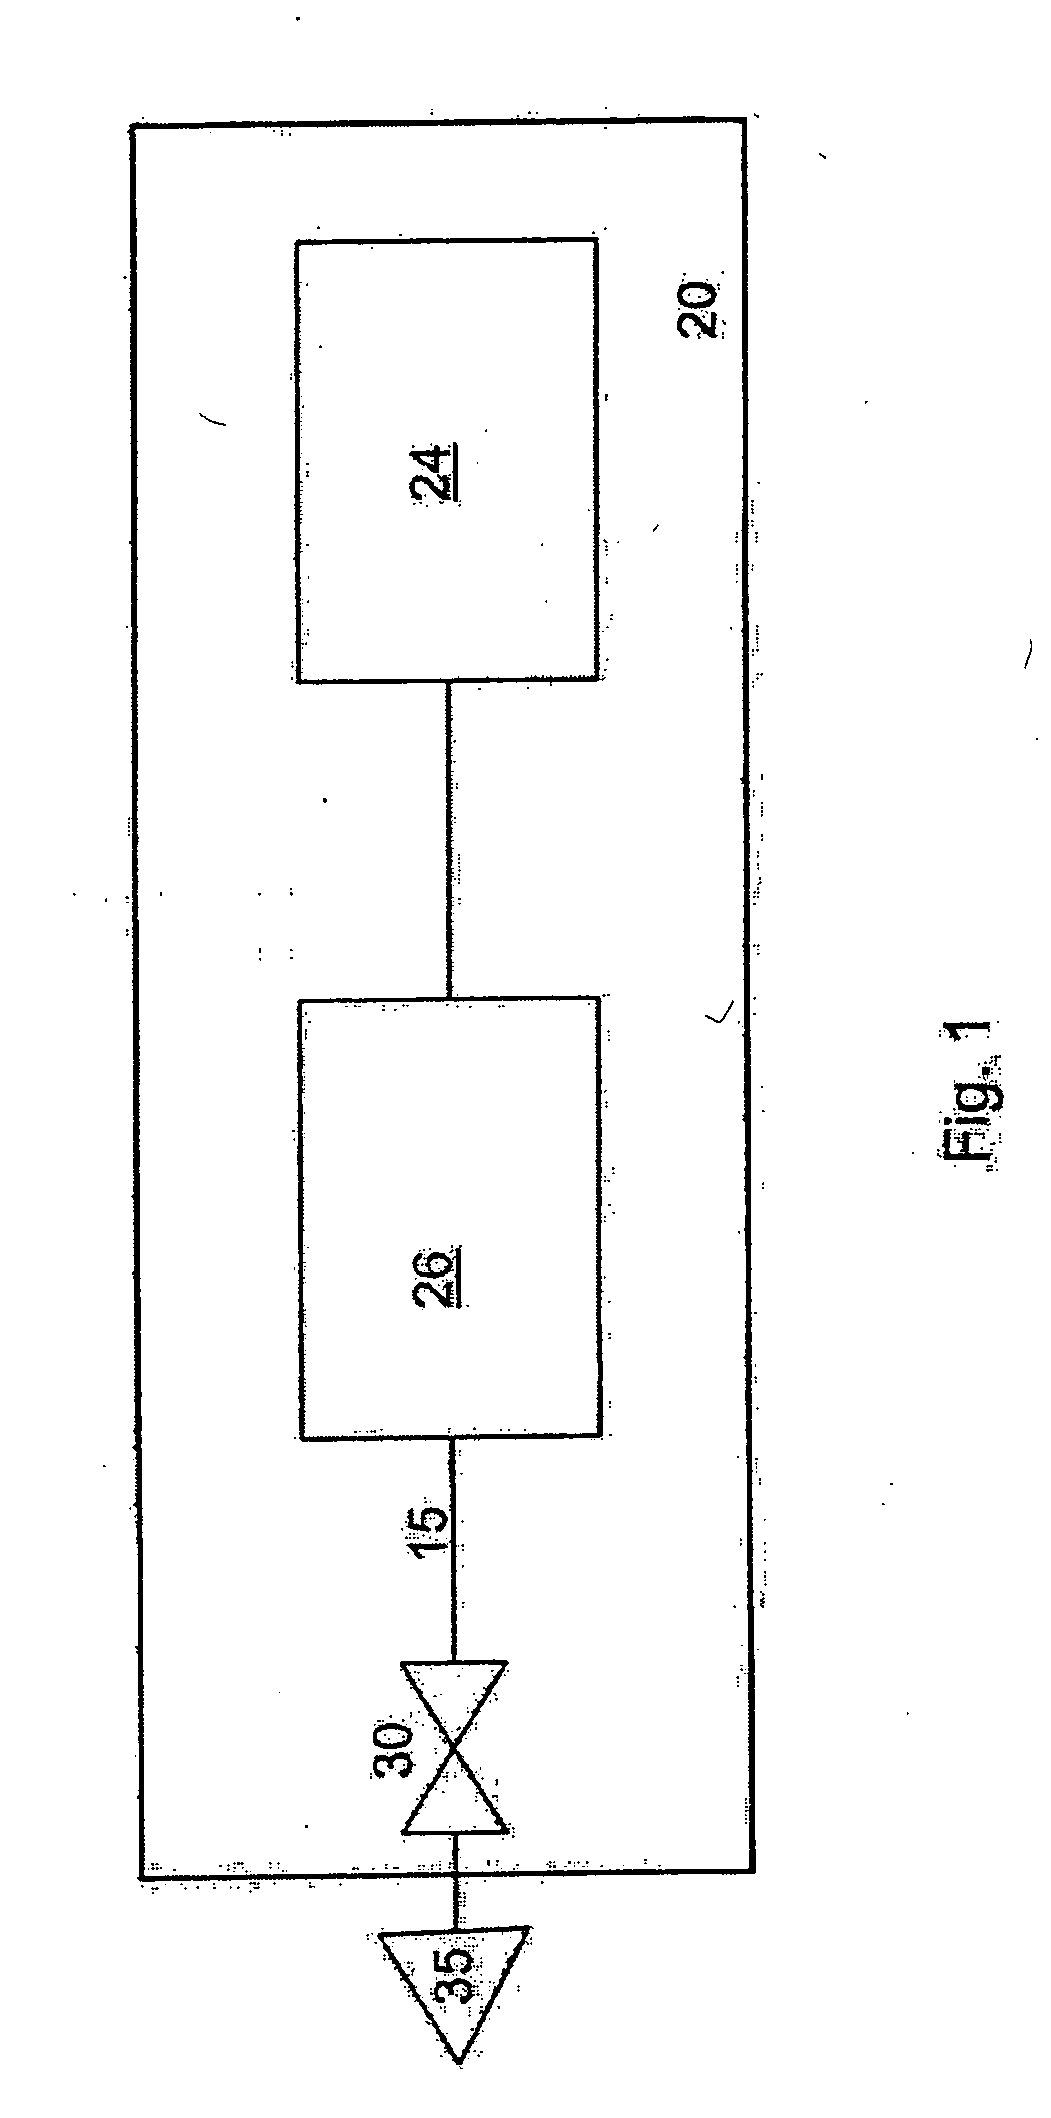 Stain-resistant grout composition, dispenser therefor, and method of use